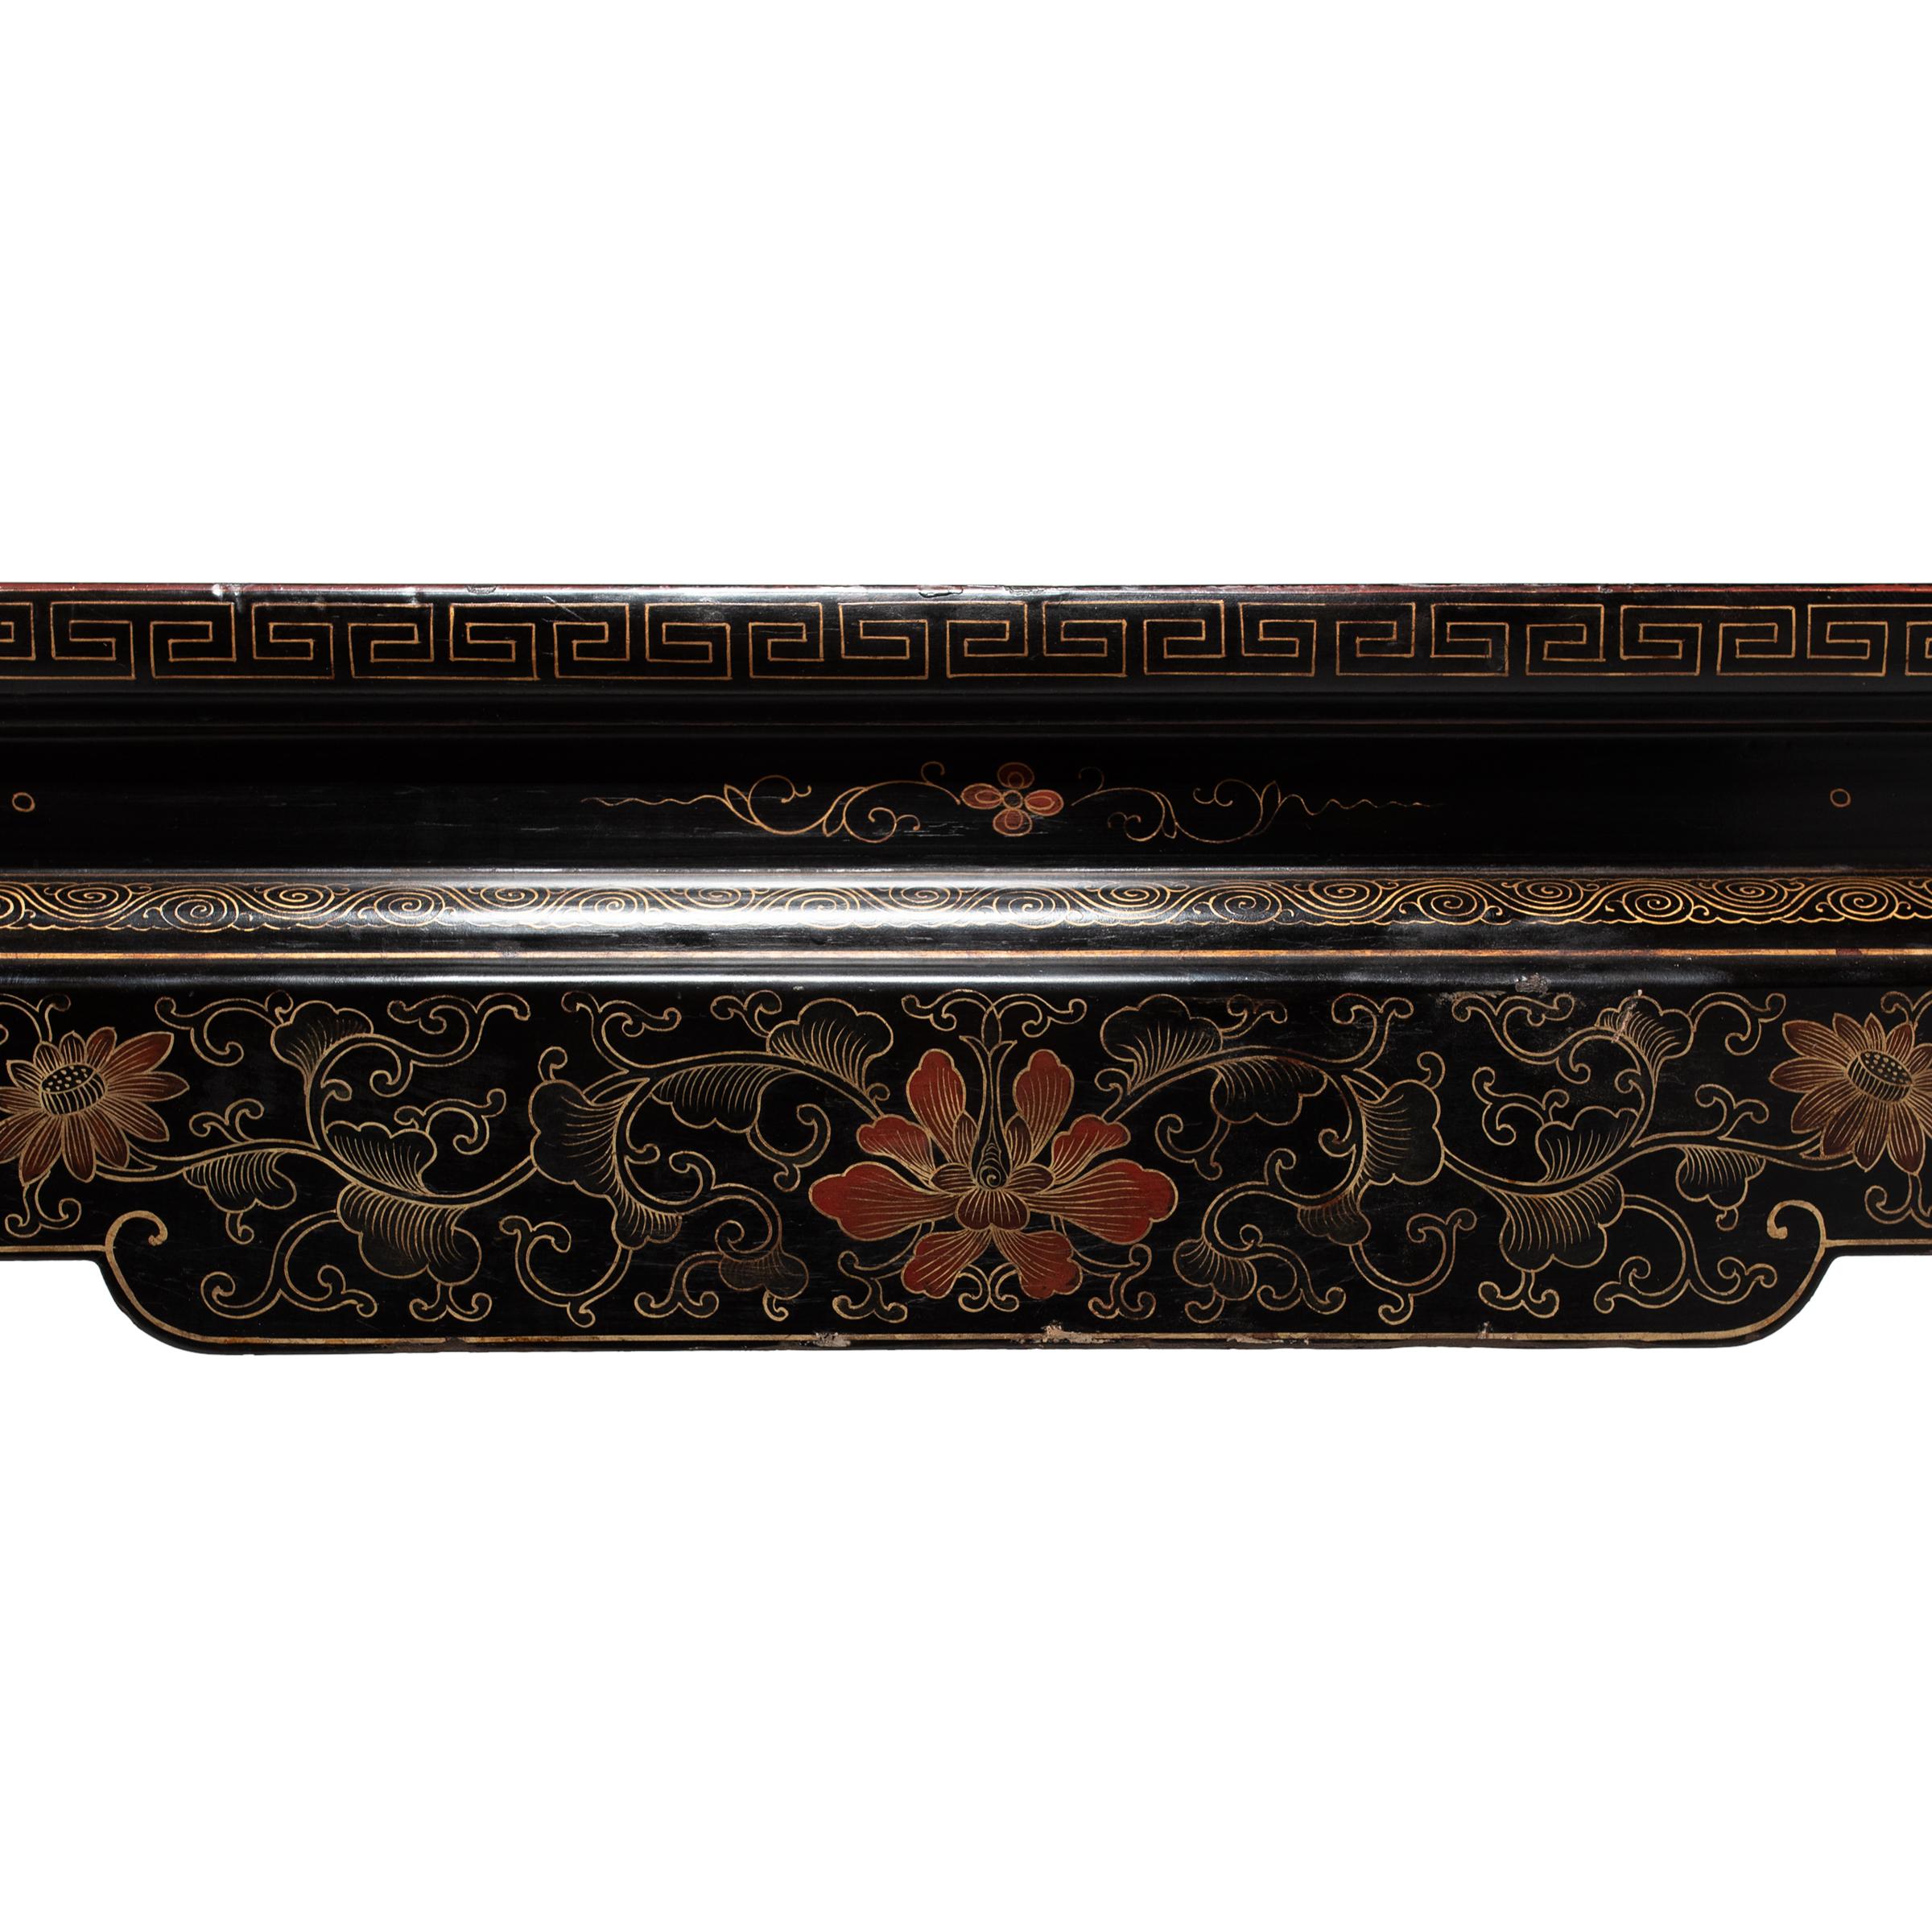 Painted Chinese Kang Table with Stone Inlay, c. 1900 For Sale 4